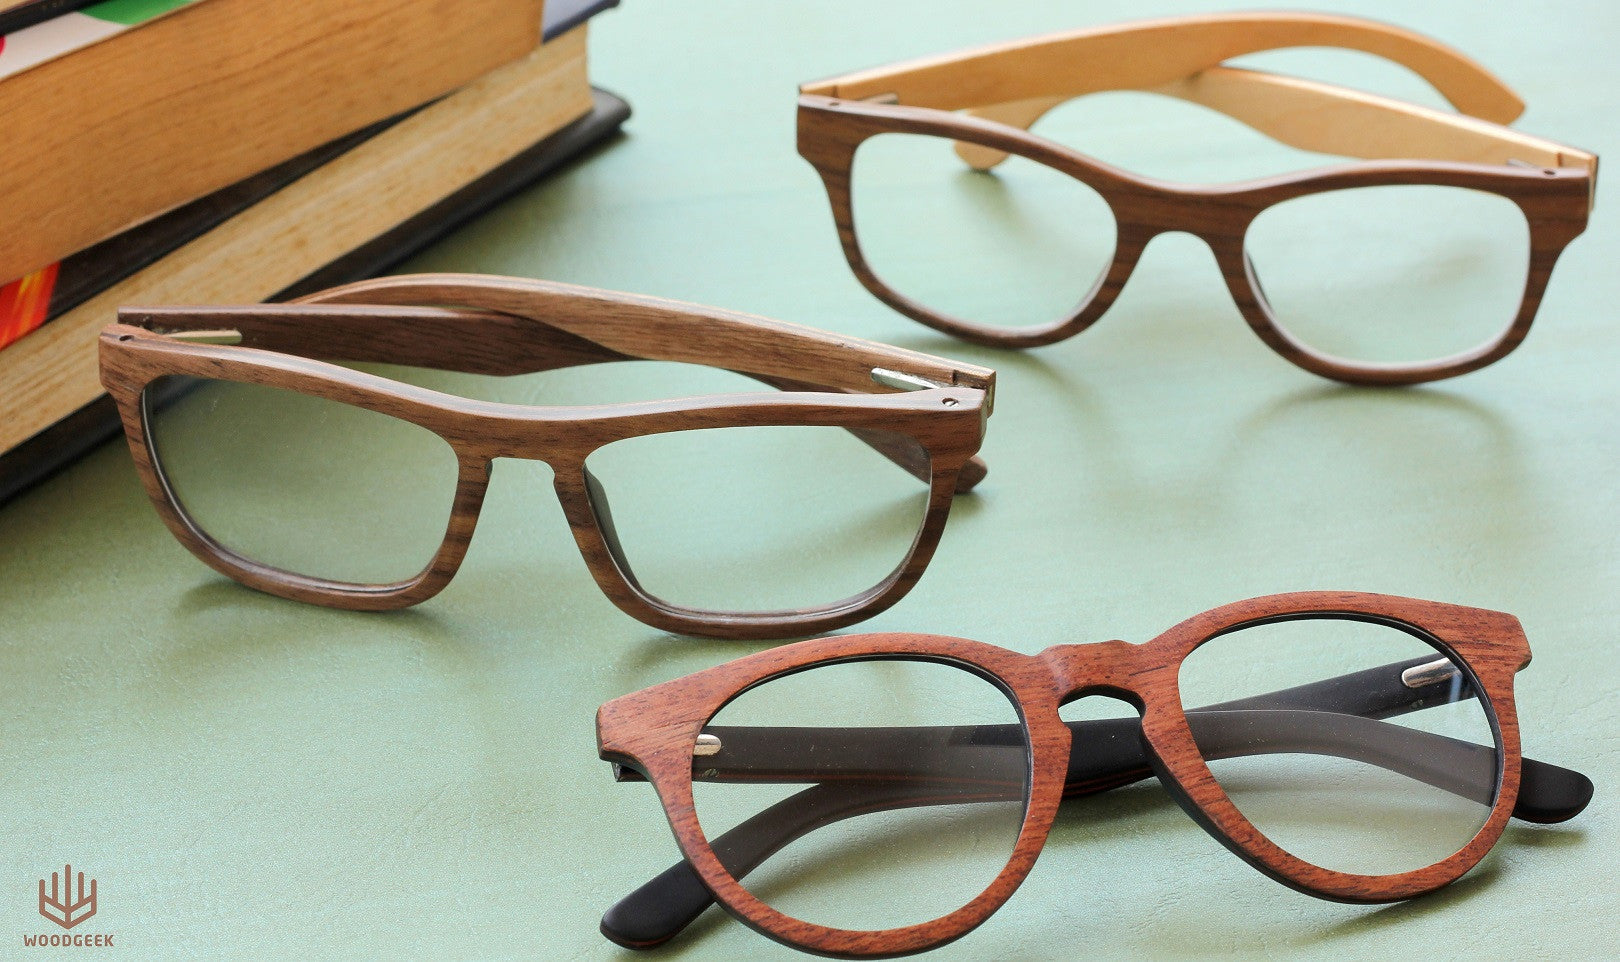 Wooden Spectacle frames - Woodgeek Store